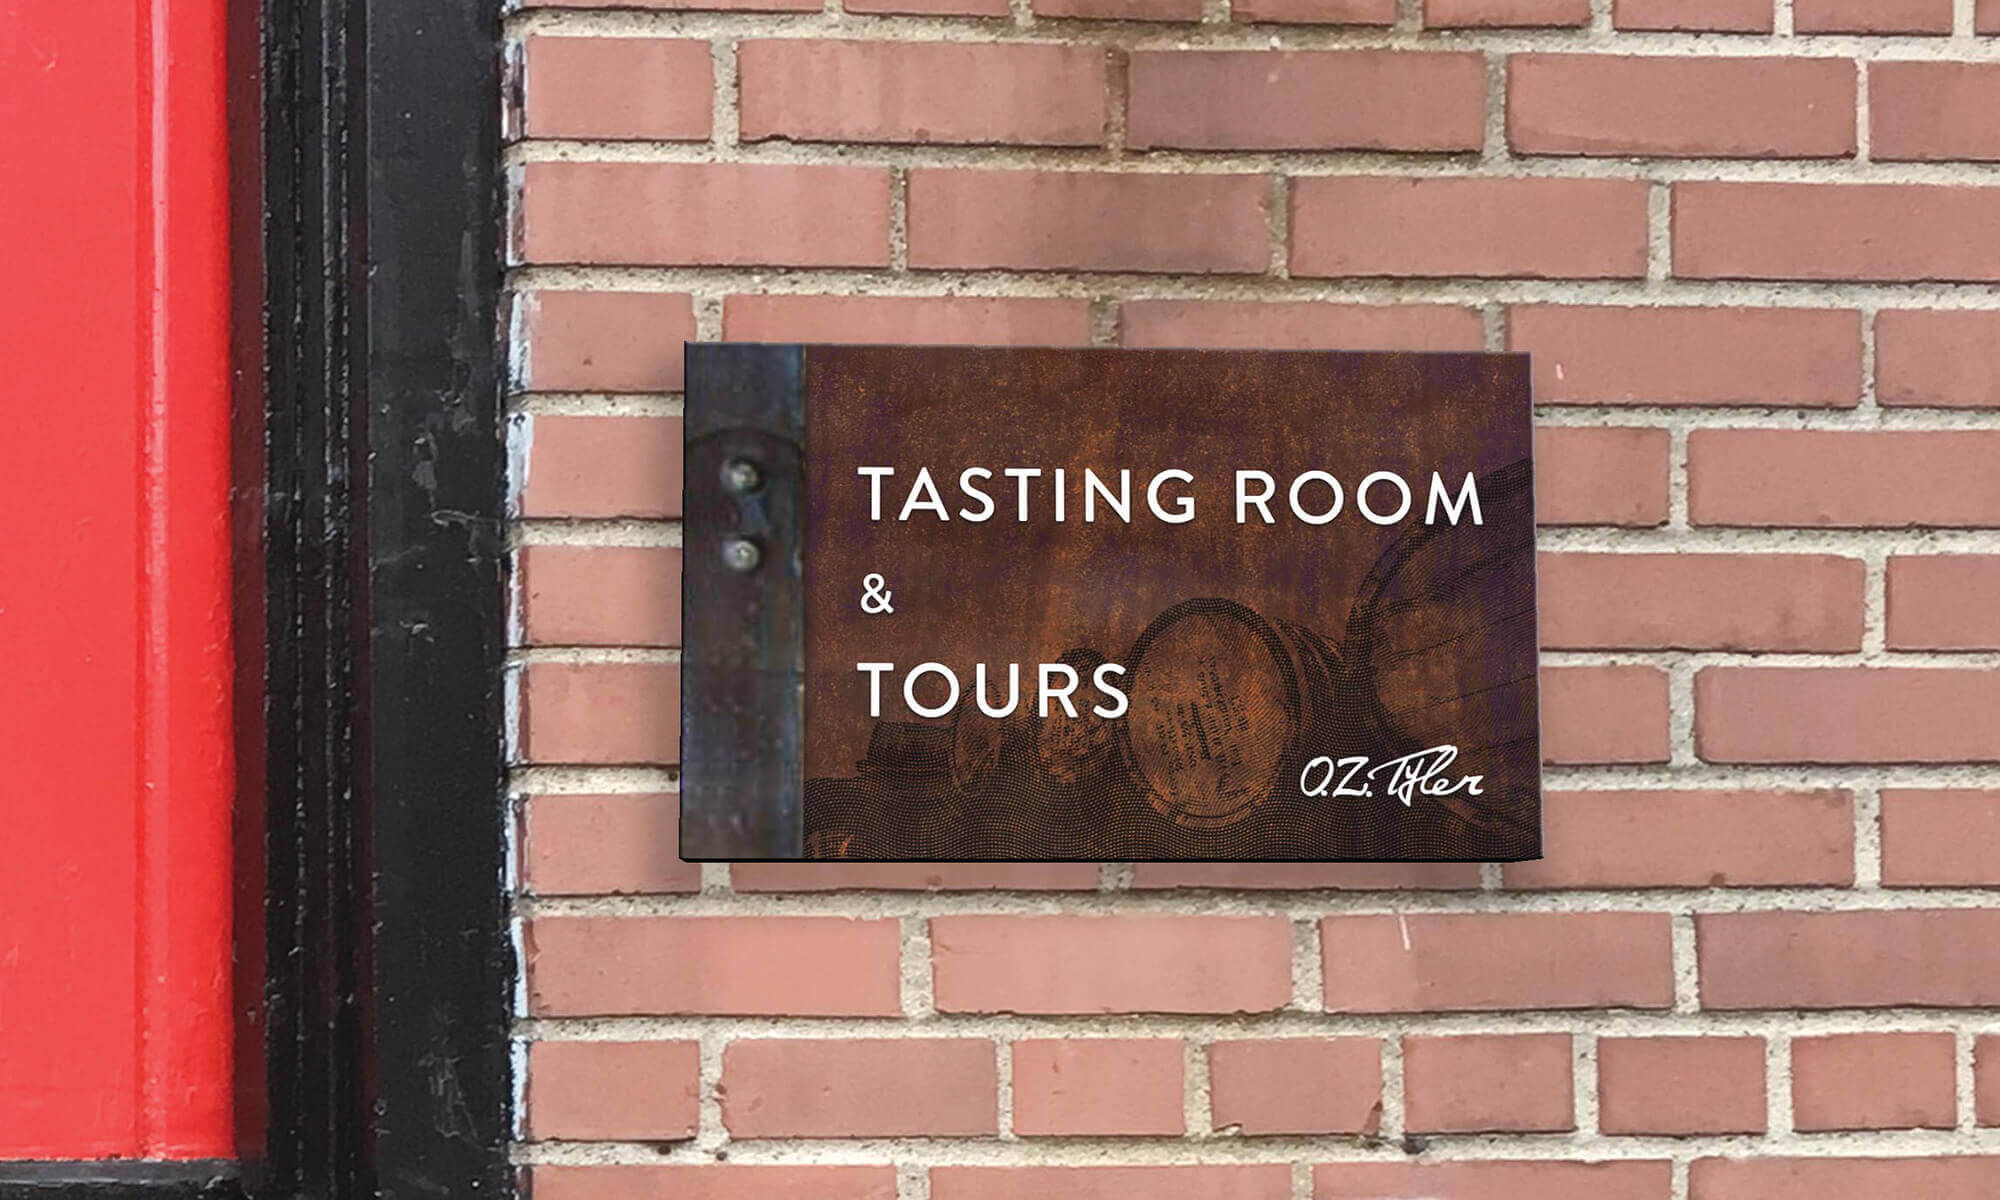 OZ Tyler wayfinding weathered metal with oak barrel imagery sign that says Tasting Room and Tours